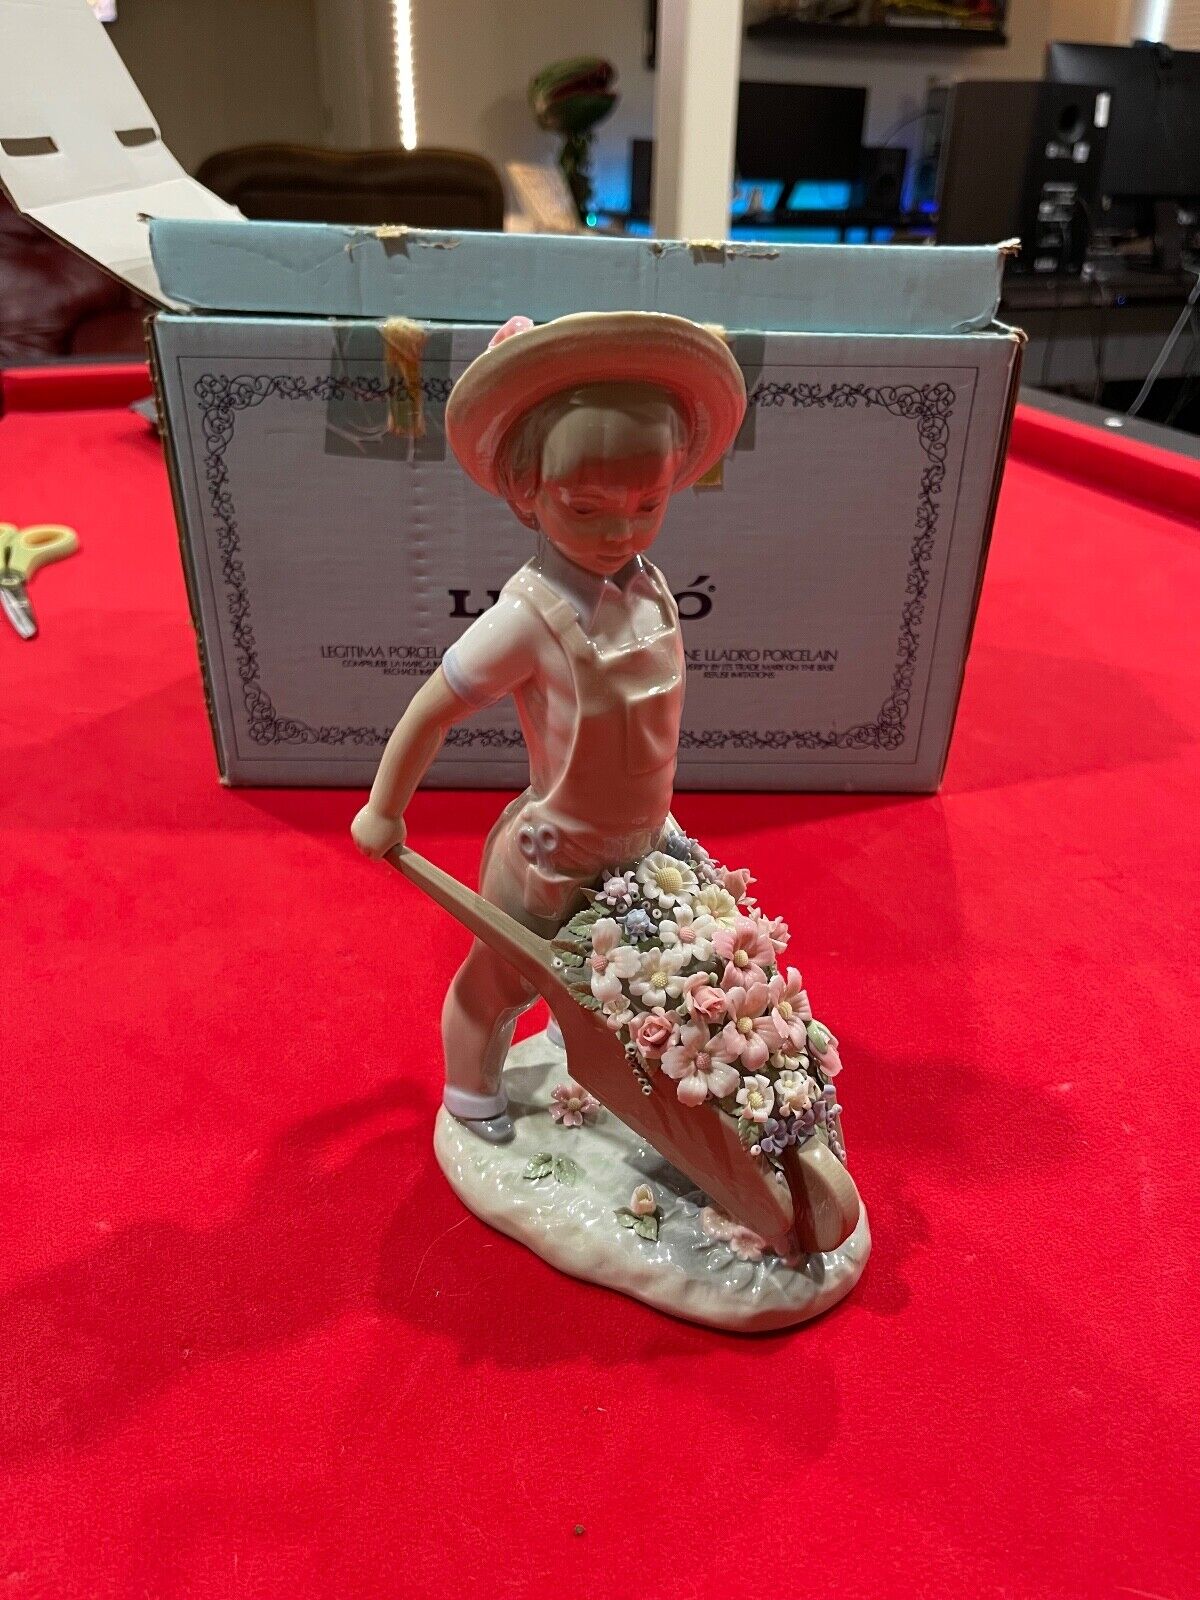 LLADRO WHEELBARROW WITH FLOWERS BOY FIGURINE #1283 USED IN BOX - EXCELLENT COND